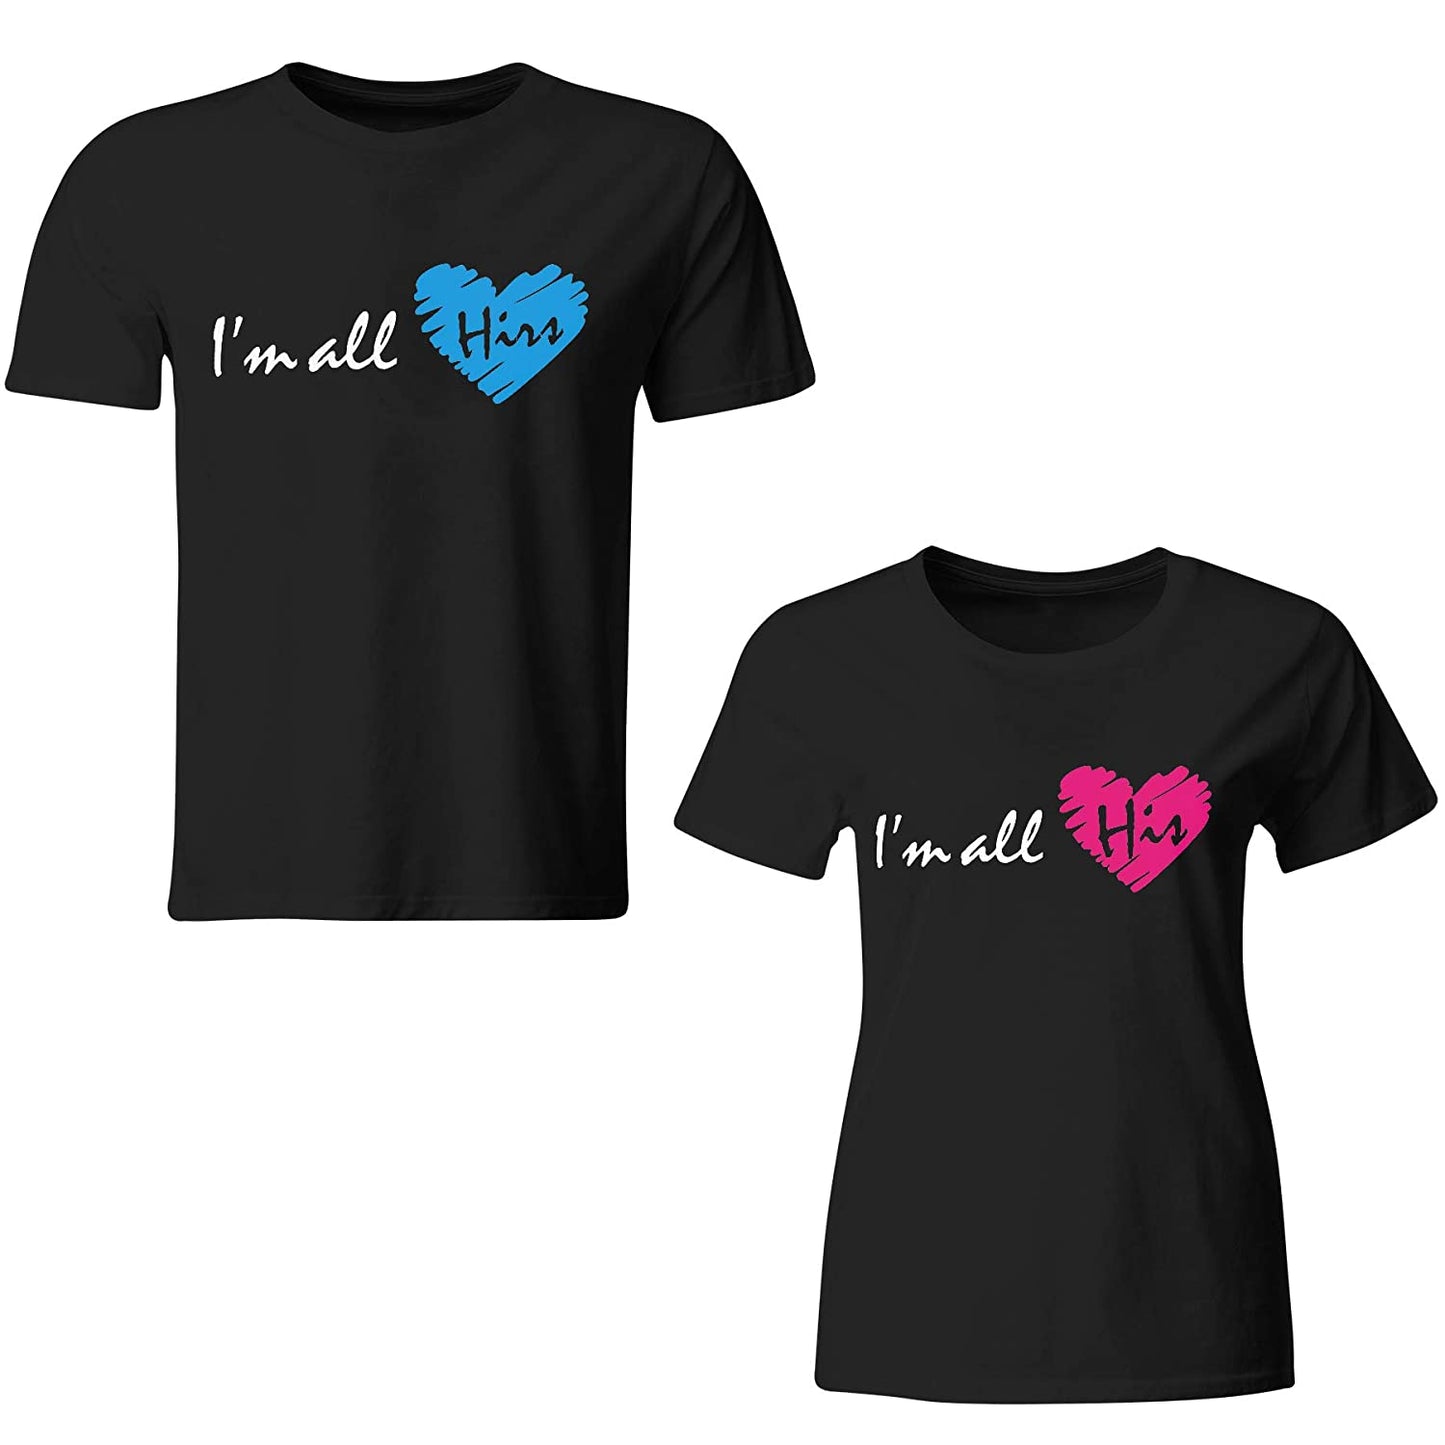 I am all his and her matching Couple T shirts- White Black